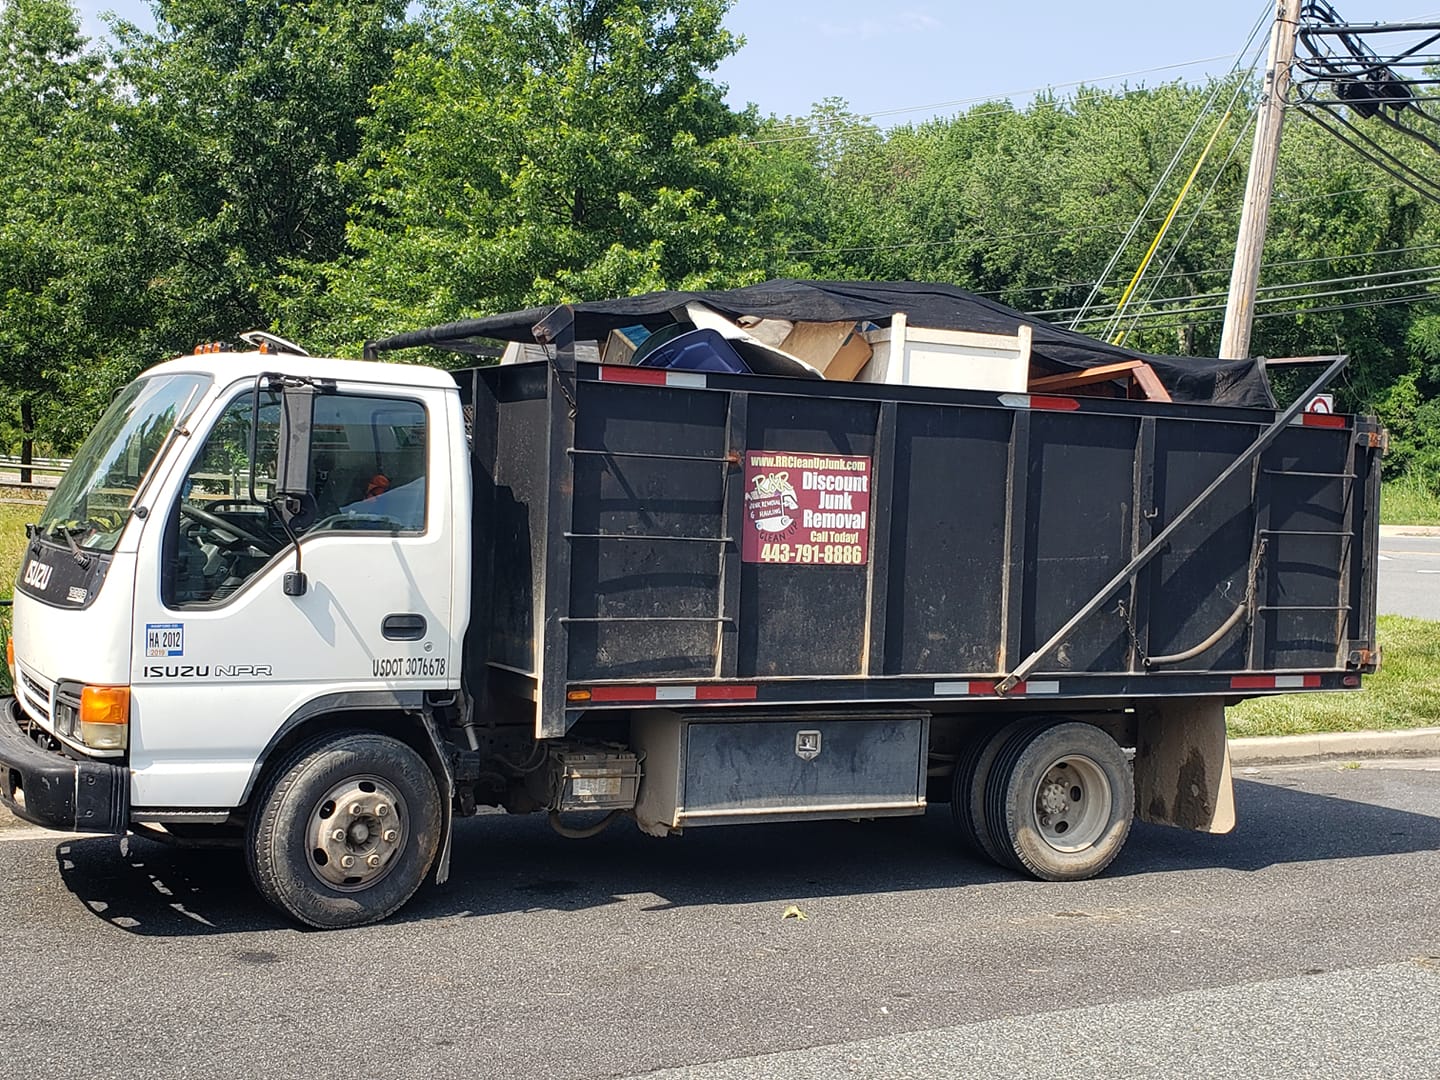 Why Choose R&R Clean Up For Your Full-Service Local Junk Pick Up, Removal, & Hauling?